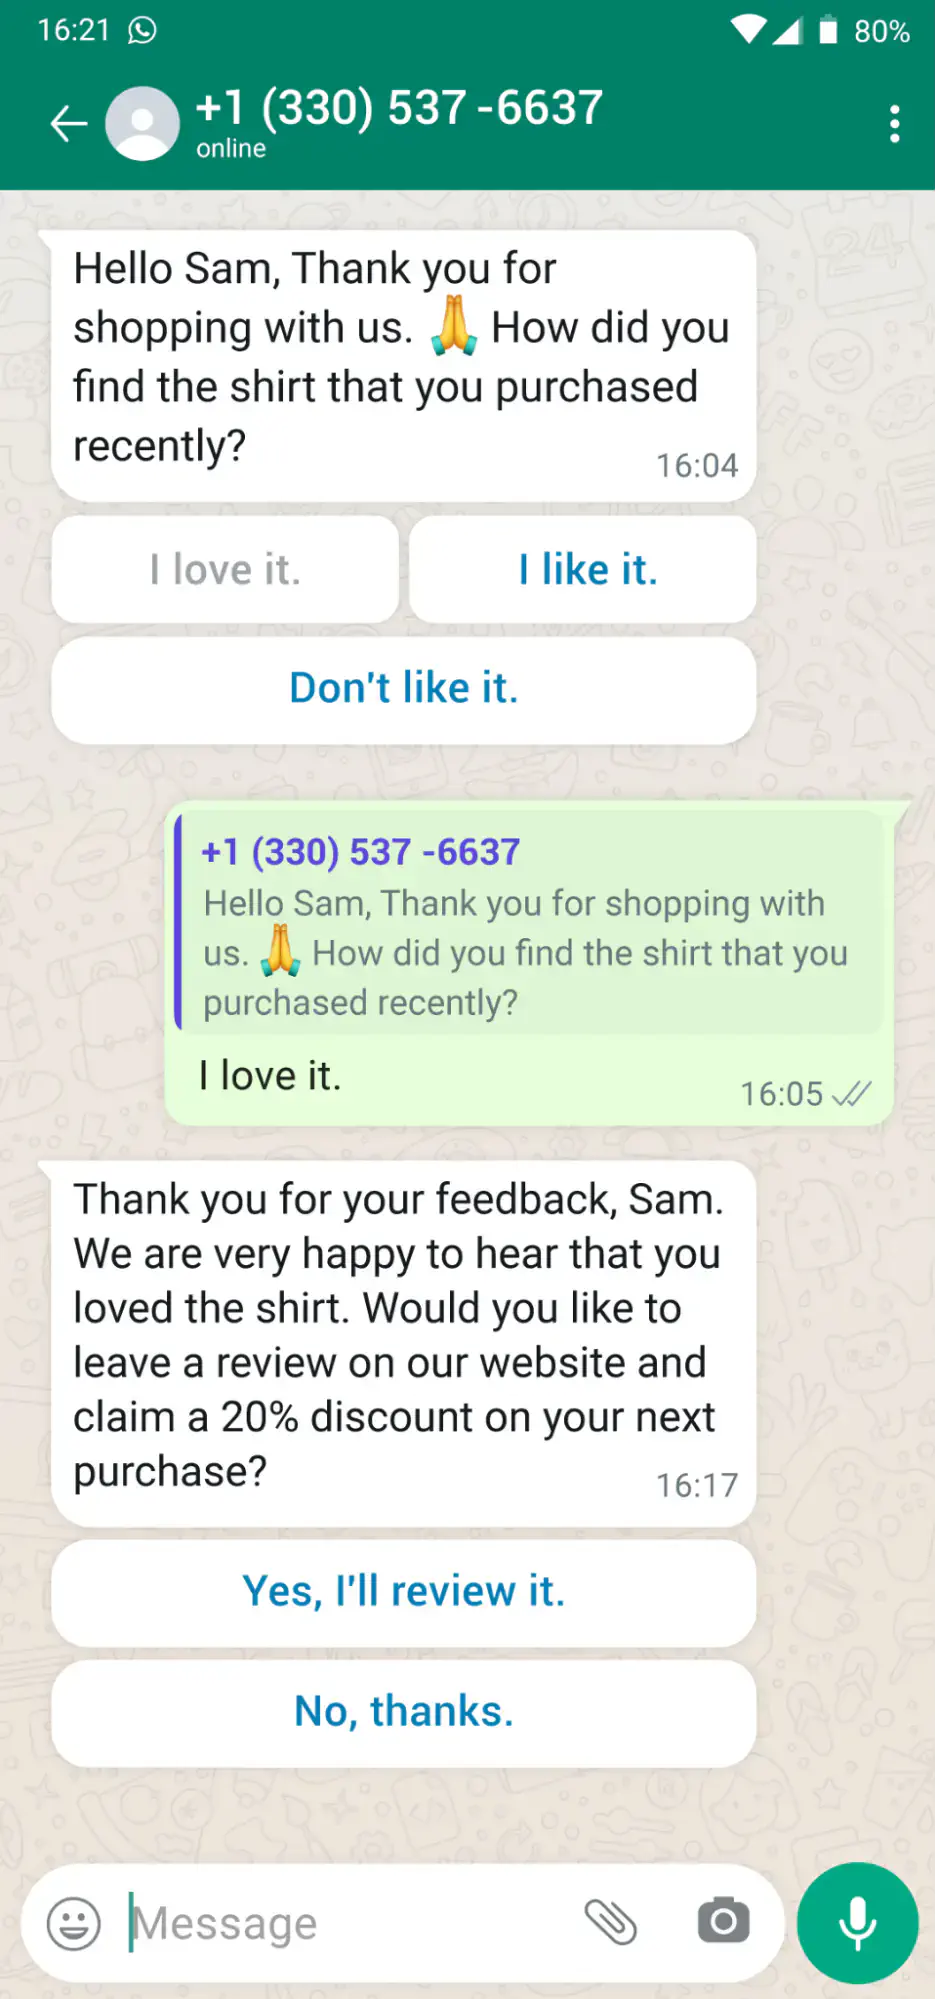 Interactive WhatsApp message used for collecting feedback and reviewes.